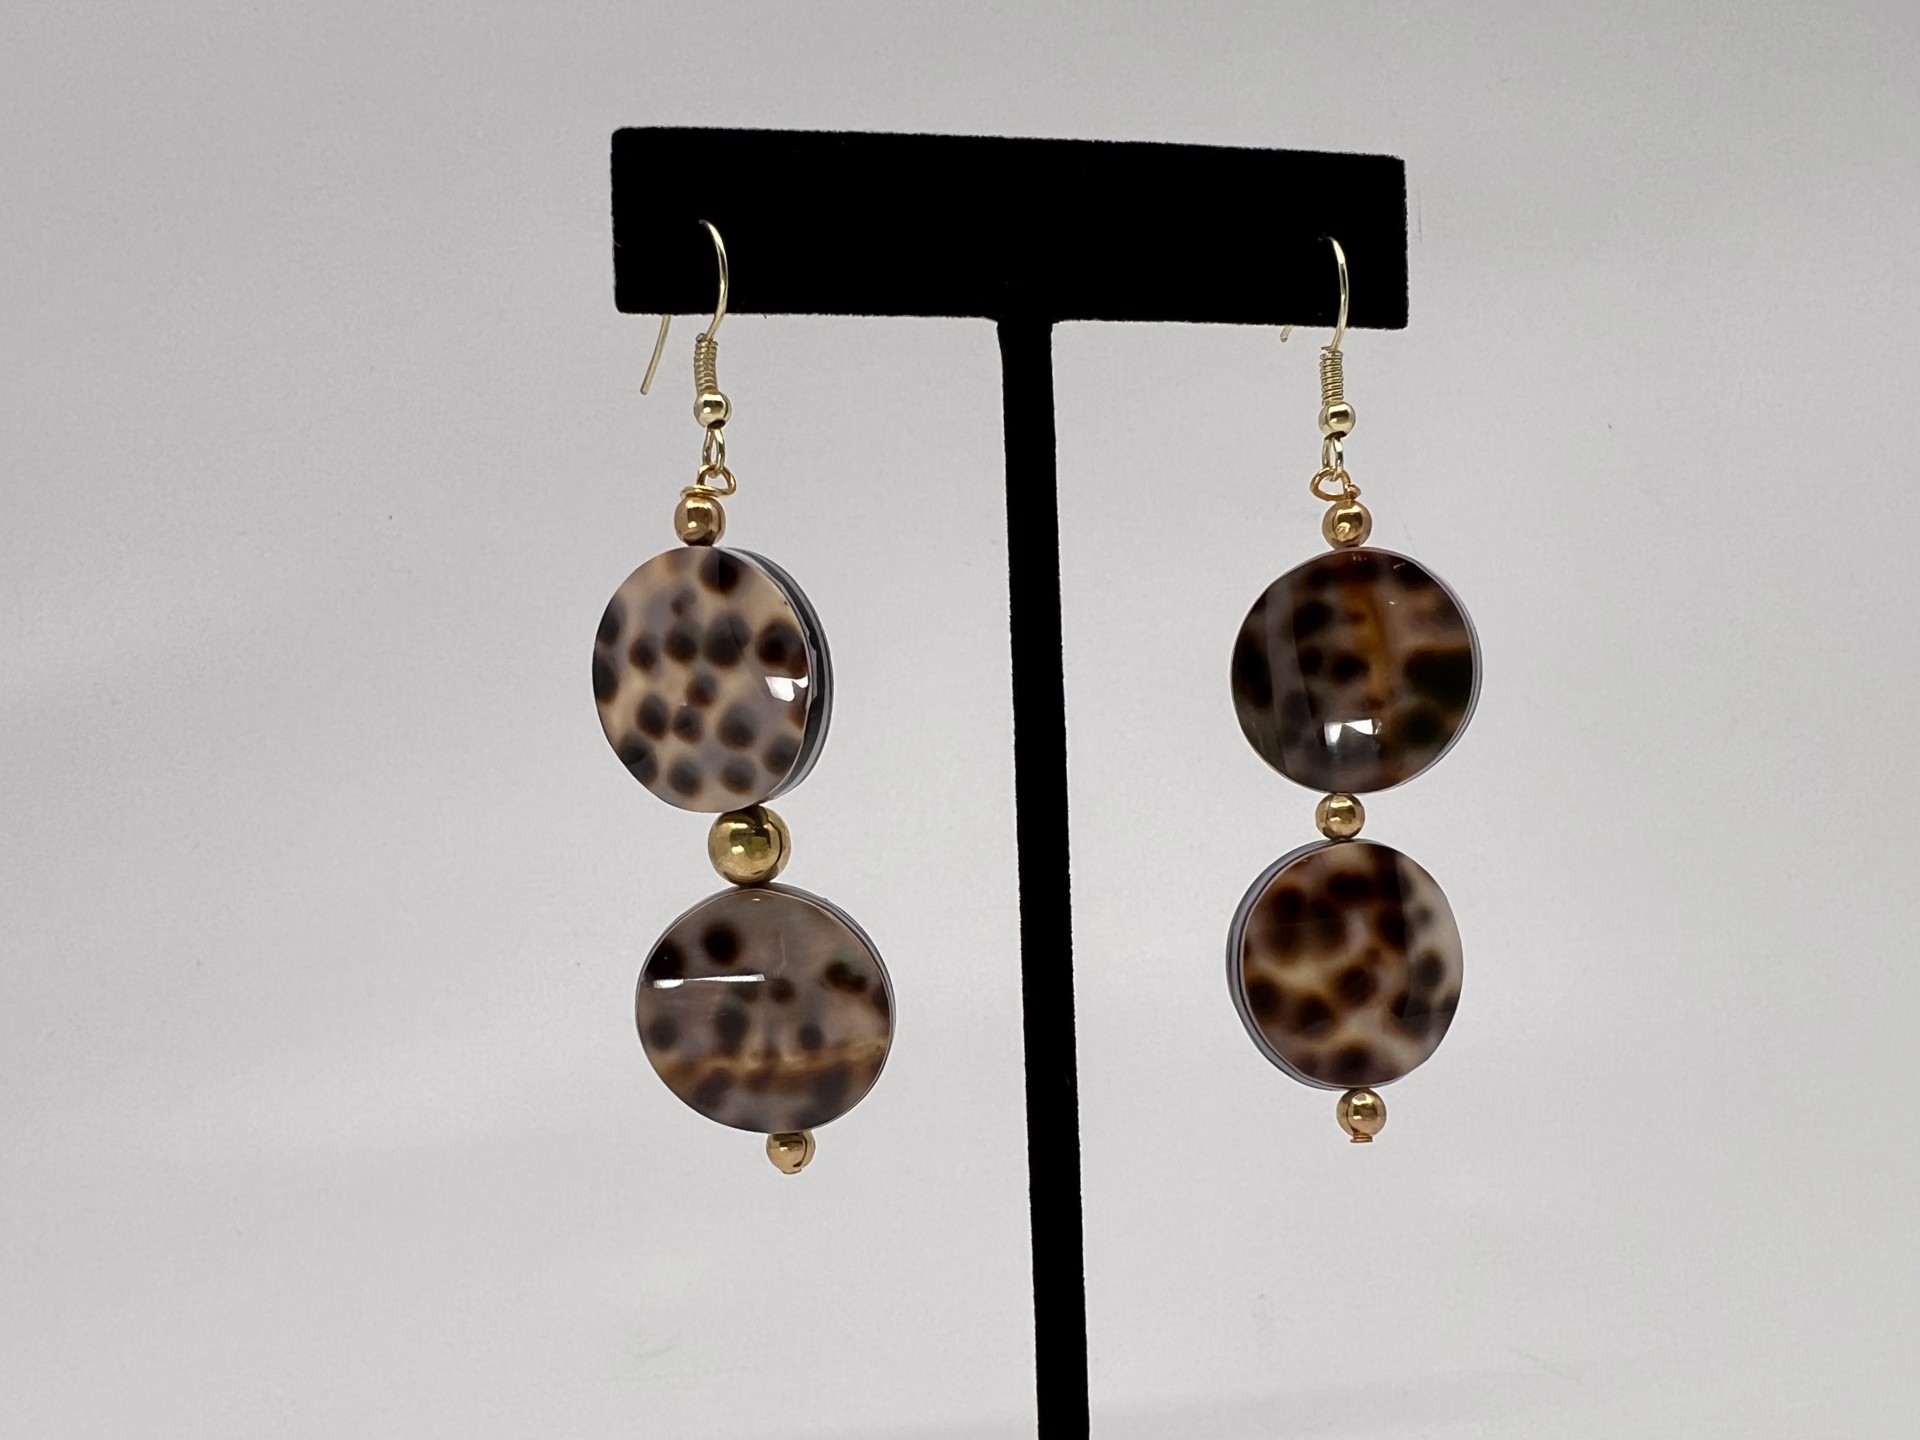 Tiger Shell Earrings with Gold Beads Two Stones by Gina Caruso